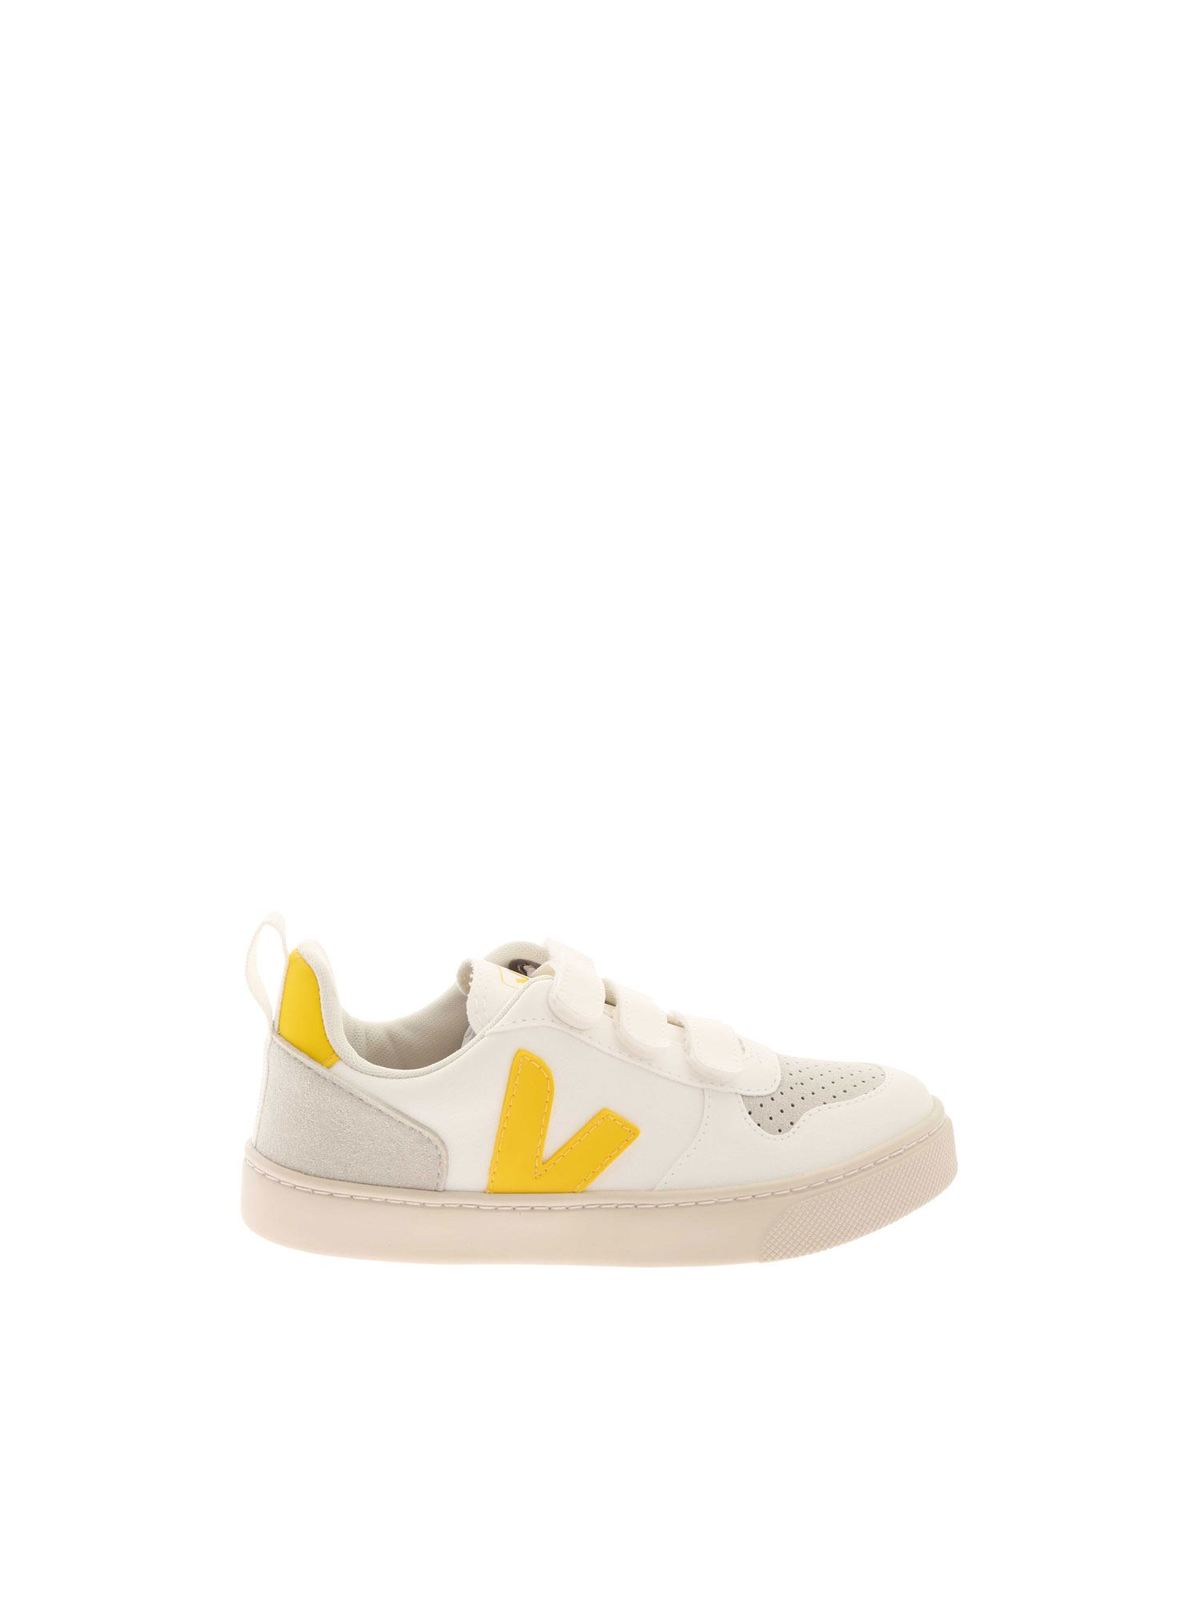 VEJA CONTRASTING DETAILS SNEAKERS IN WHITE